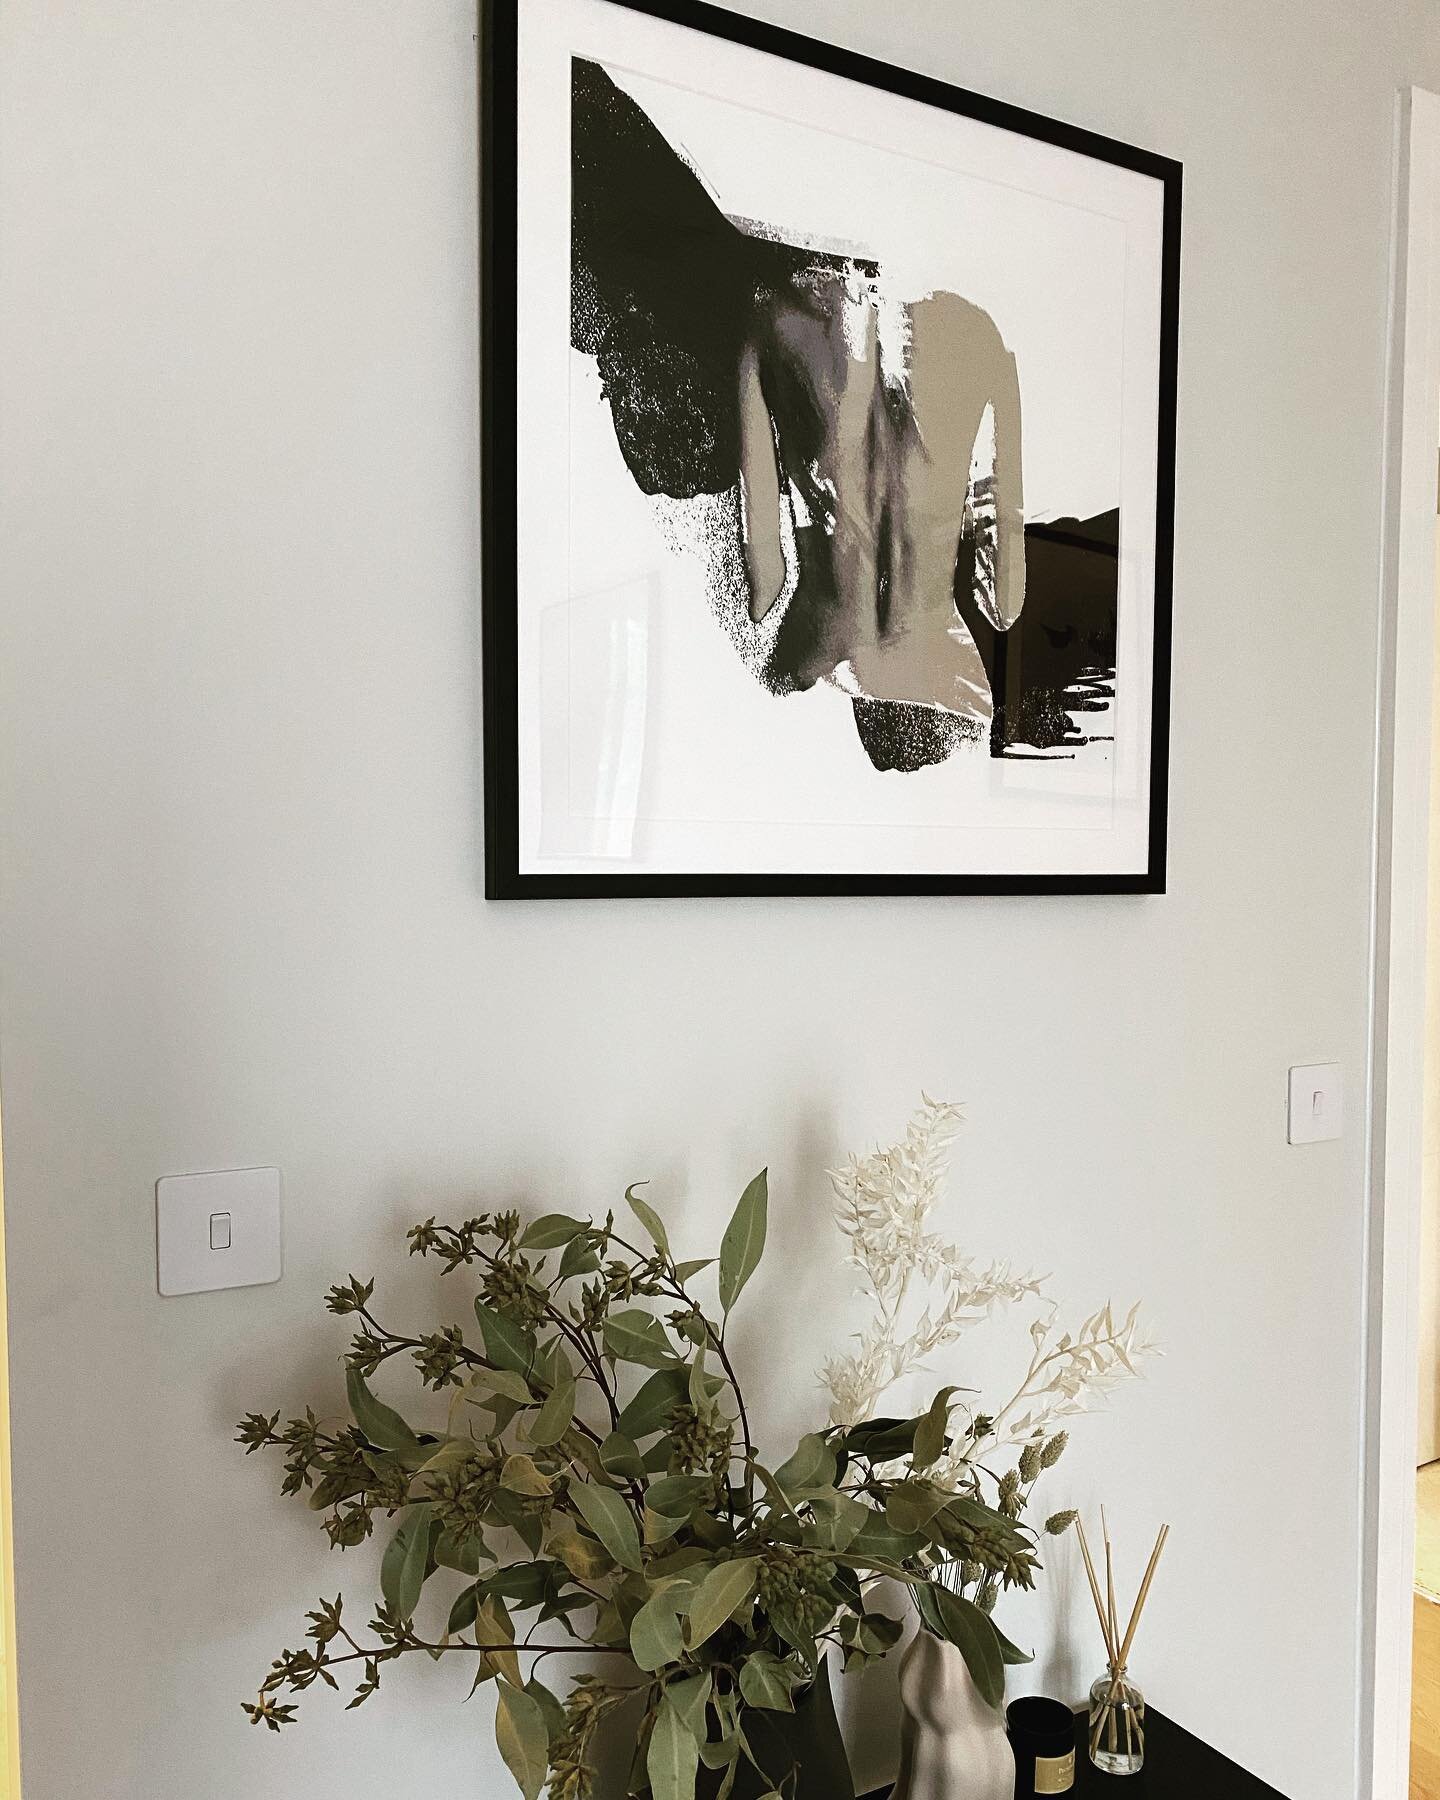 One of the aspects I love most about staging is choosing the art. This project in Kilburn allowed me to go quite edgy! Love this print from @mipic_app